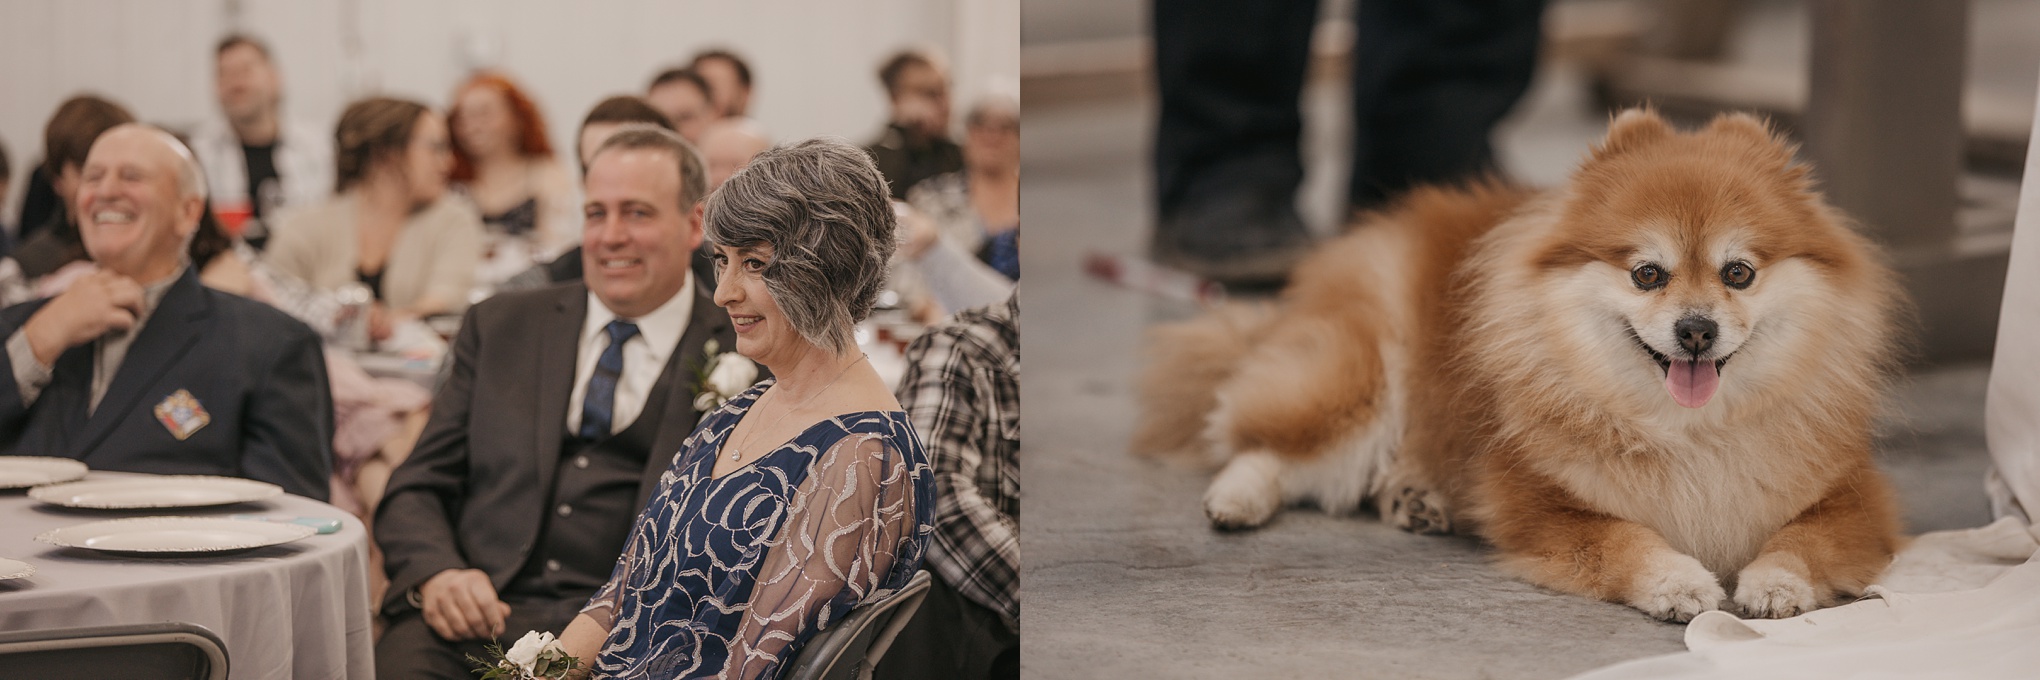 How to incorporate your pet at wedding